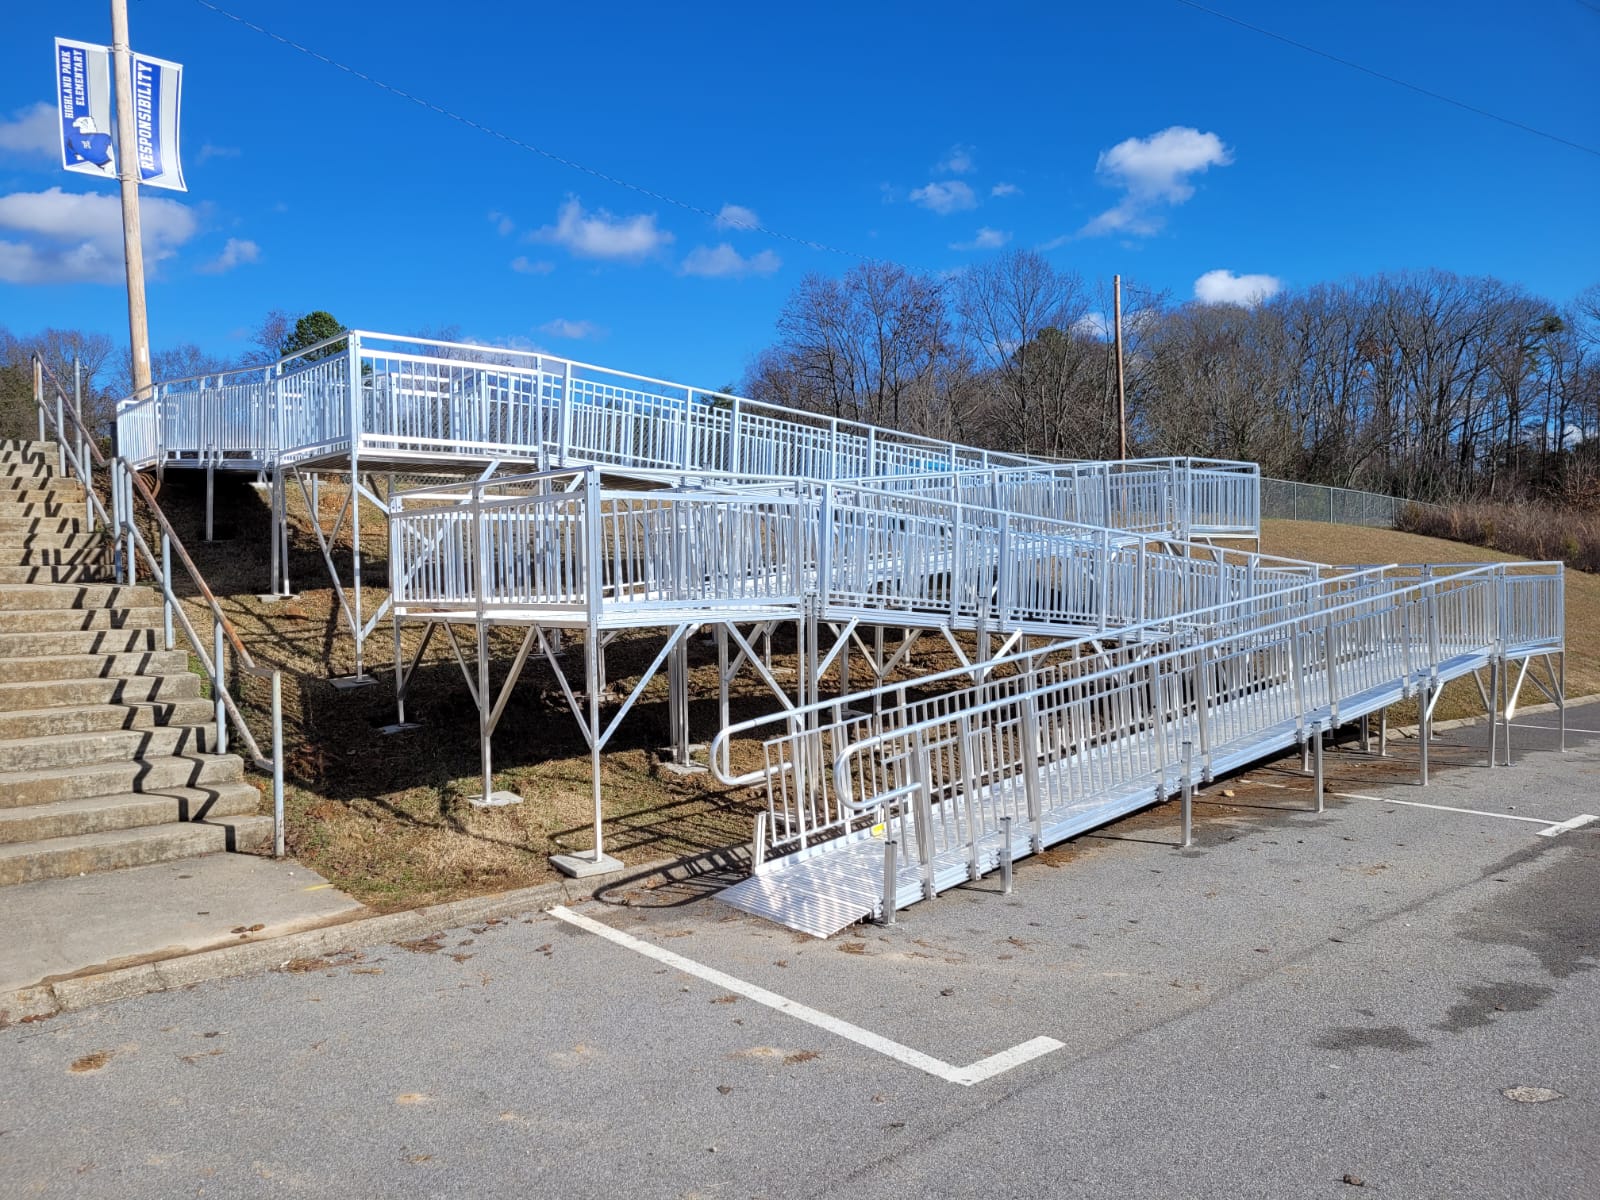 Next Day Access Knoxville Installs Large ADA Compliant Ramp